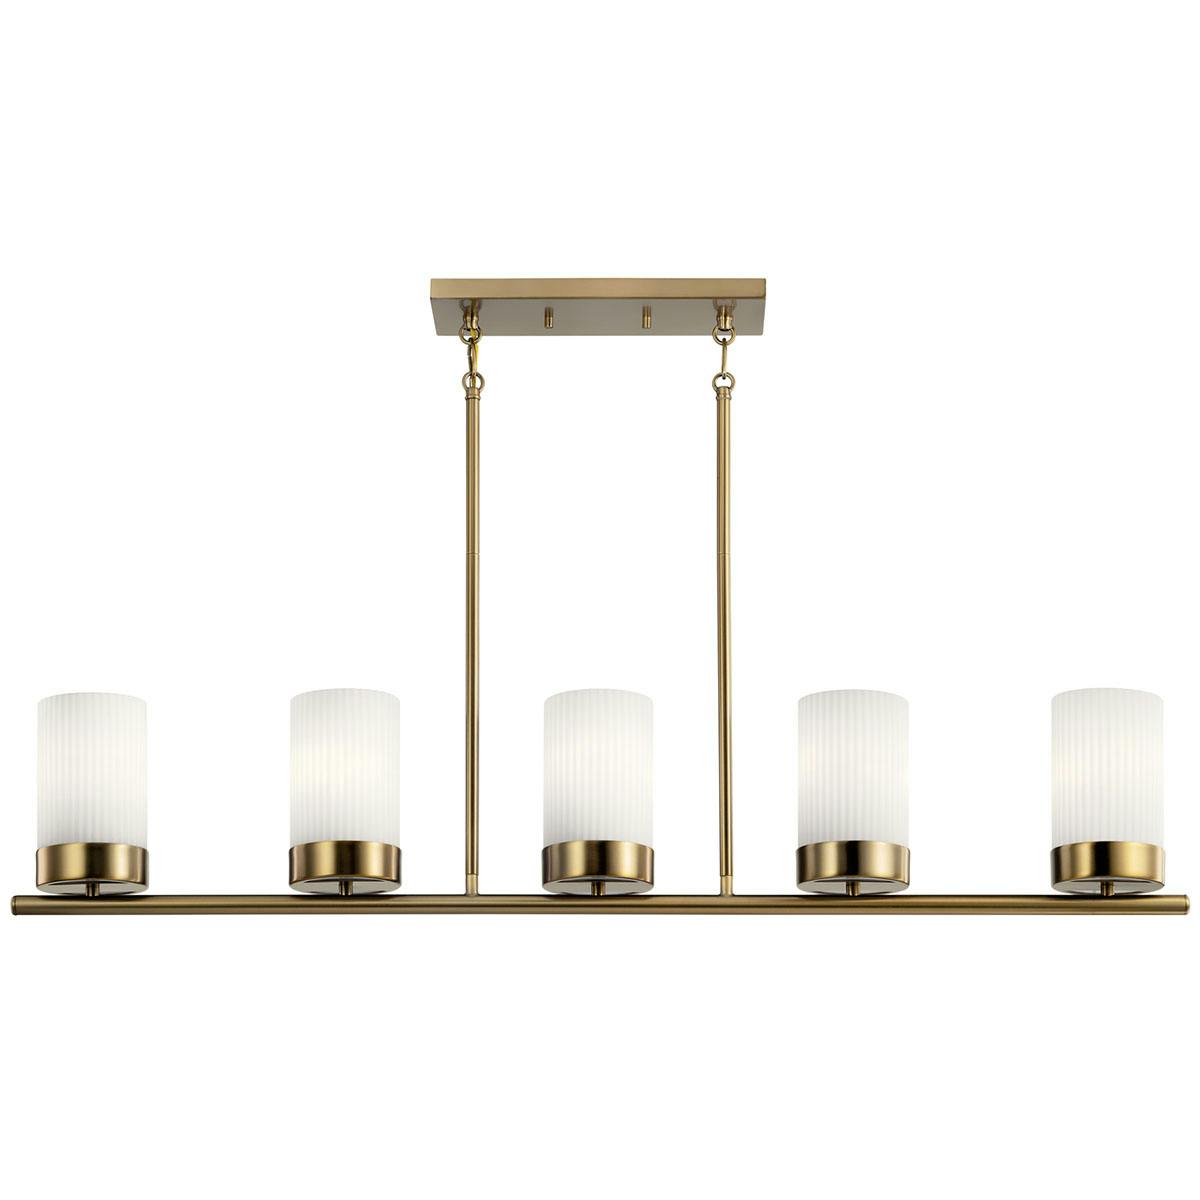 Front view of the Ciona 43" 5 Light Linear Chandelier Brass on a white background